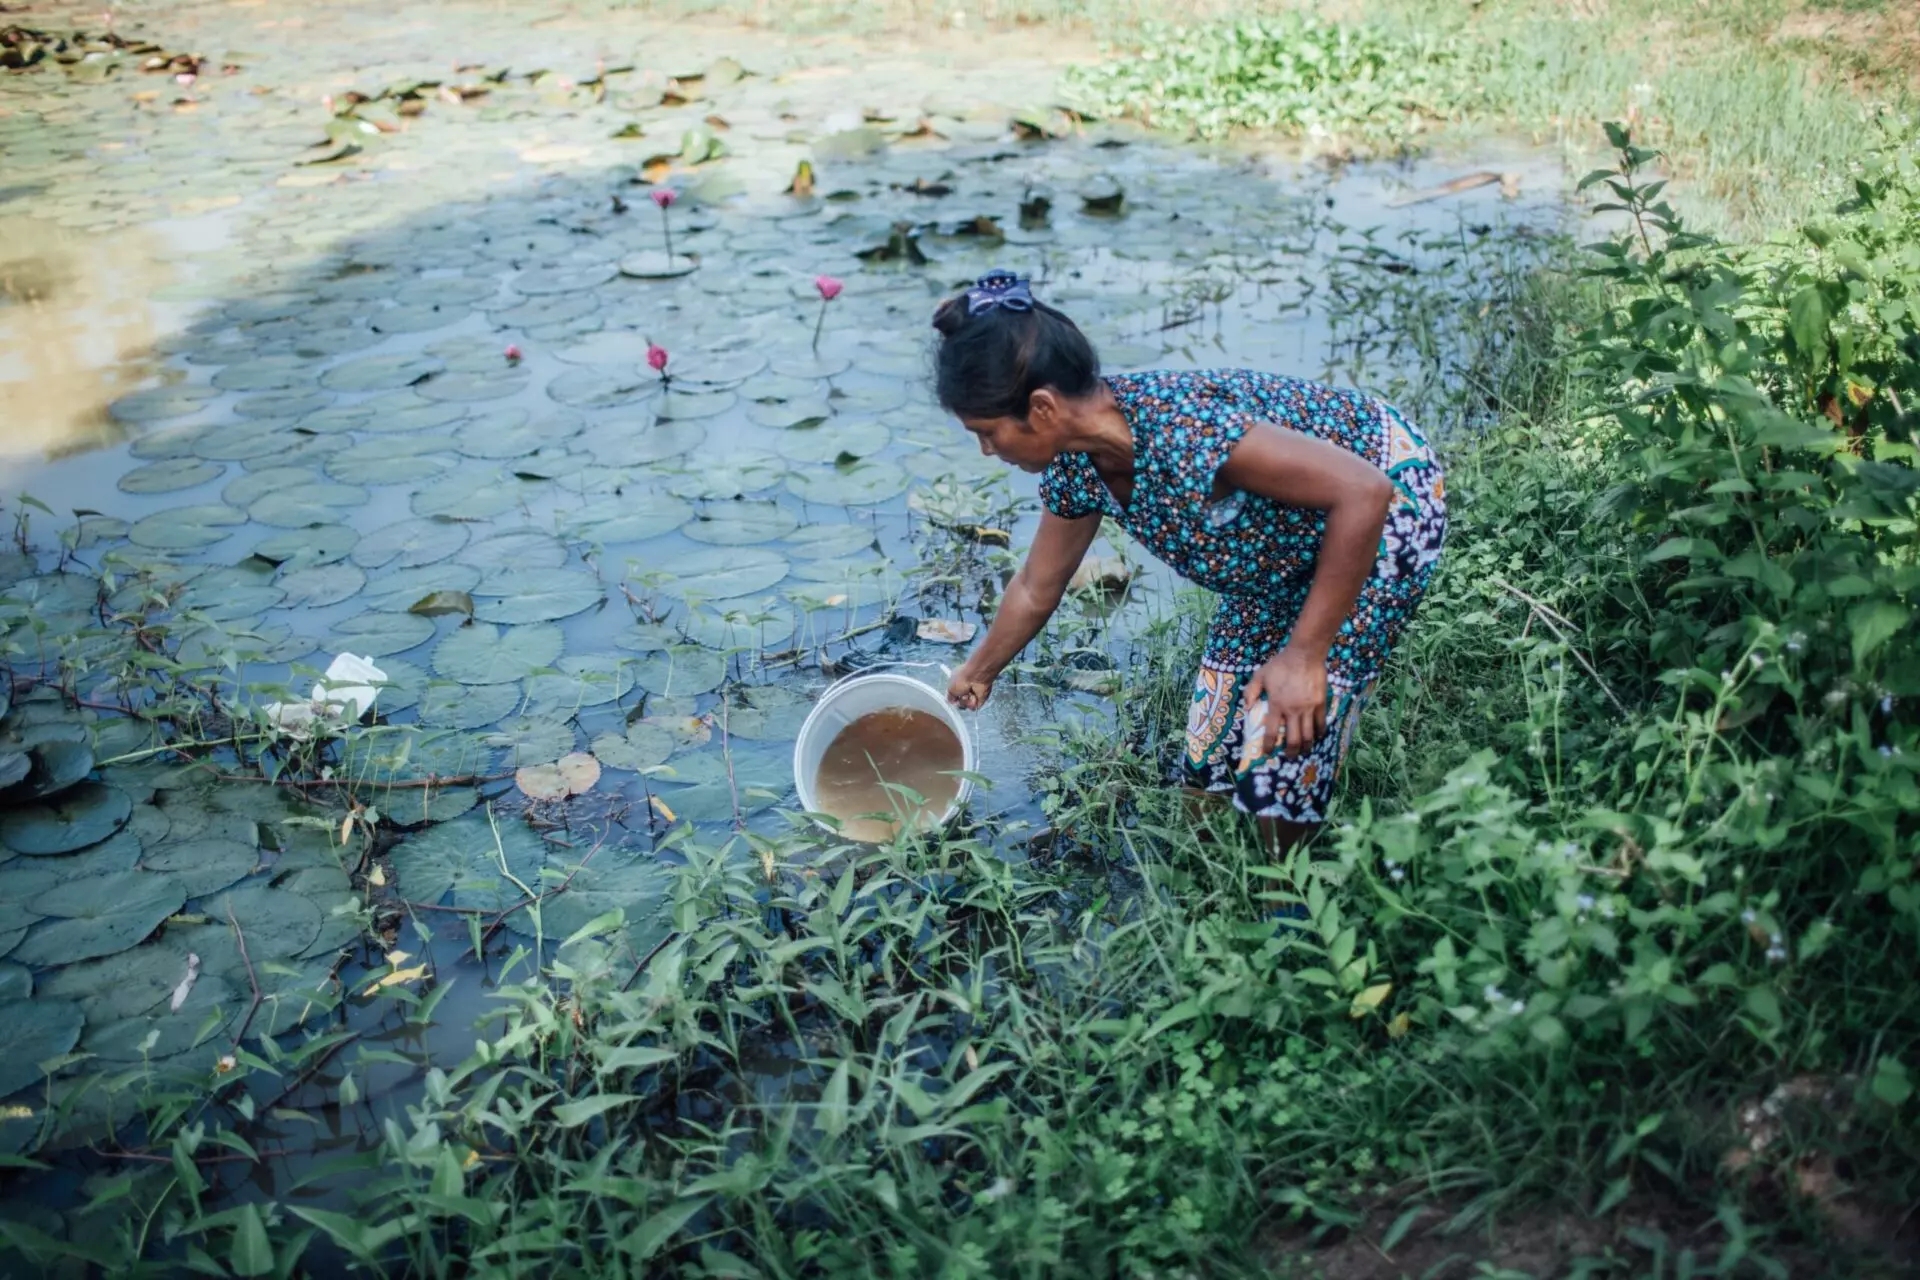 A woman collects water from an open pond in Cambodia for her family.